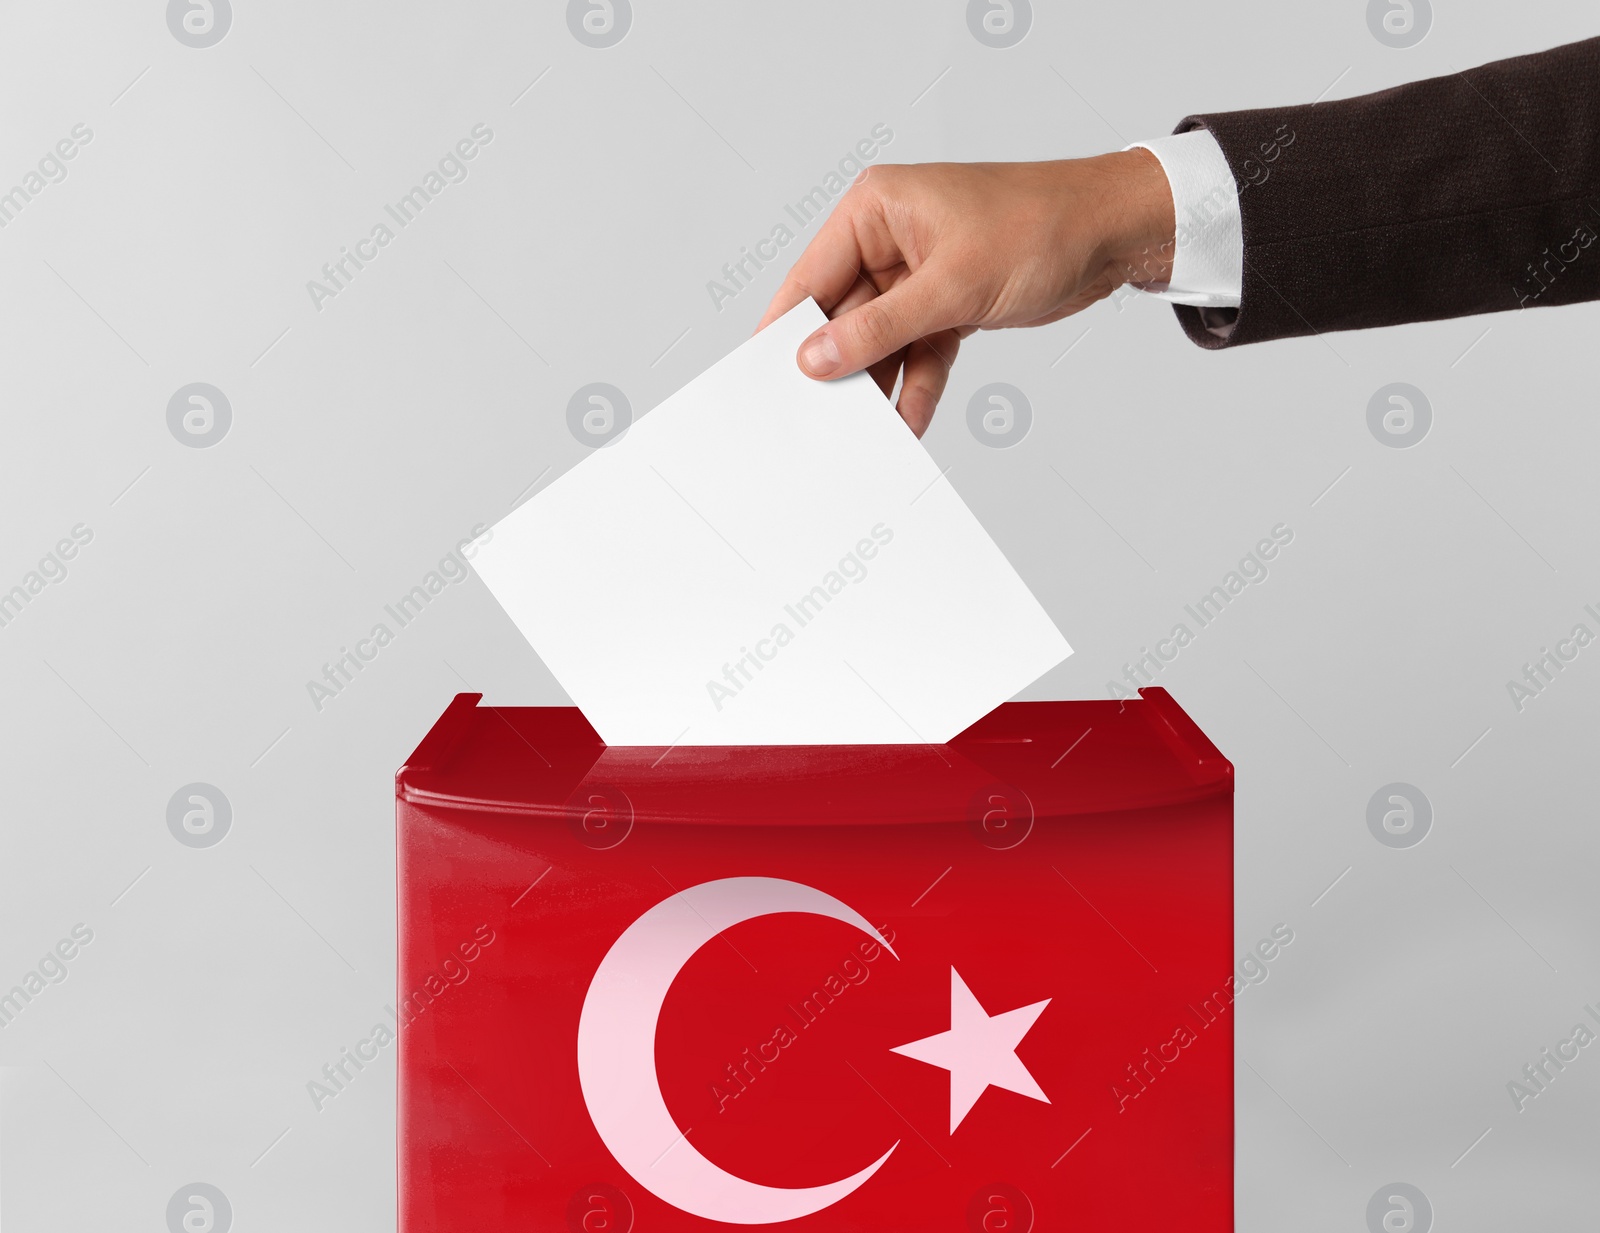 Image of Man putting his vote into ballot box decorated with flag of Turkey against light background, closeup